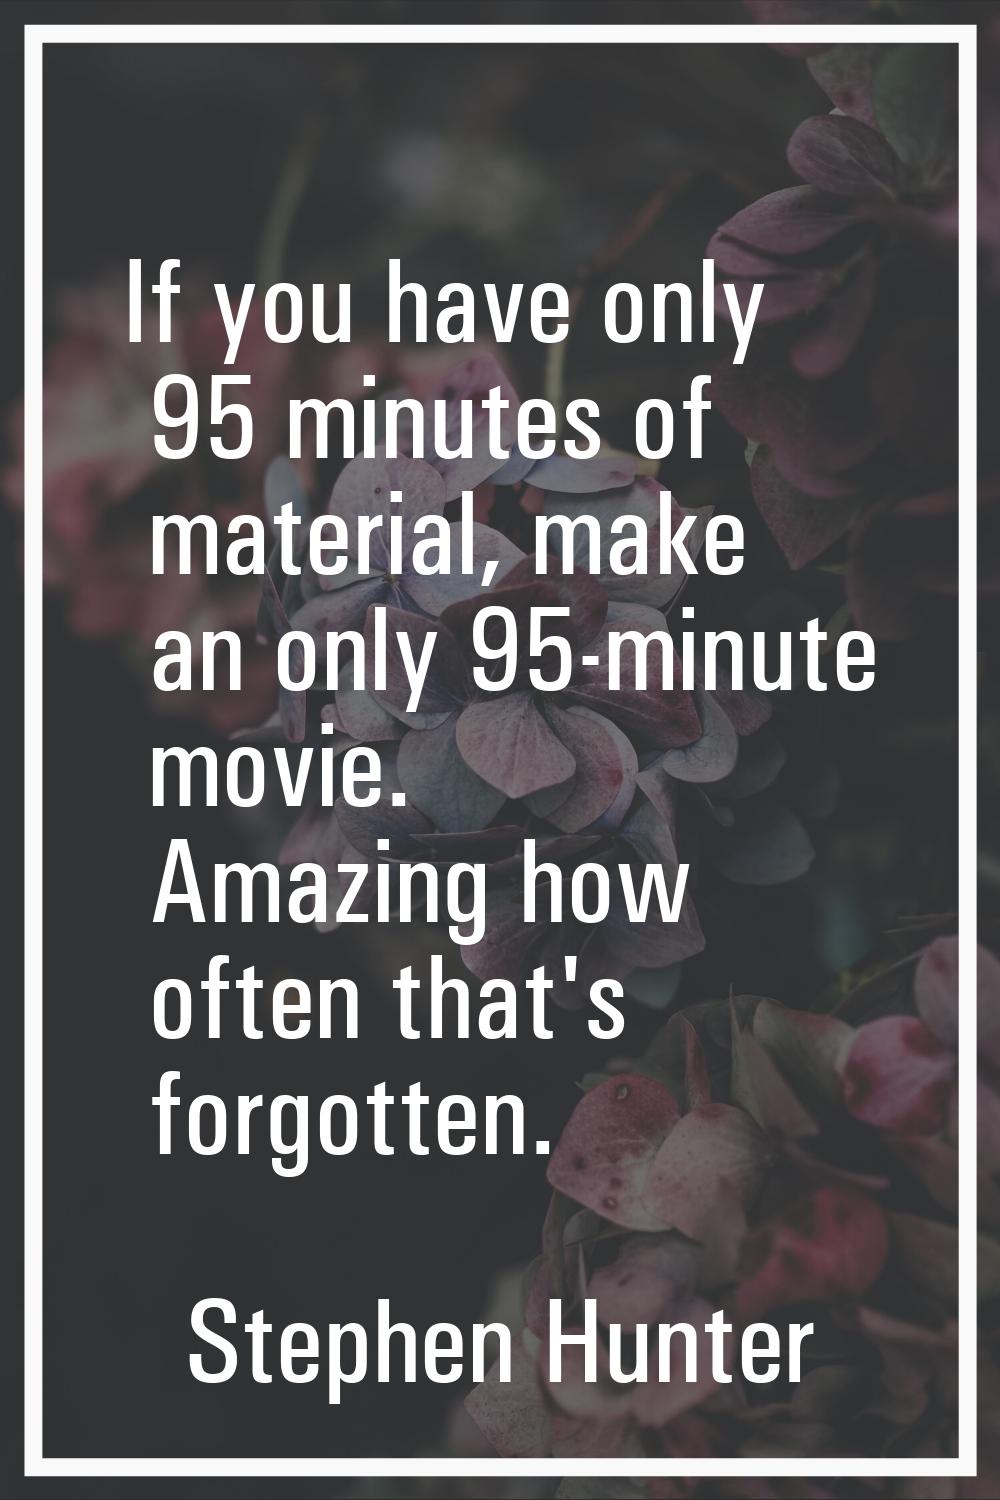 If you have only 95 minutes of material, make an only 95-minute movie. Amazing how often that's for